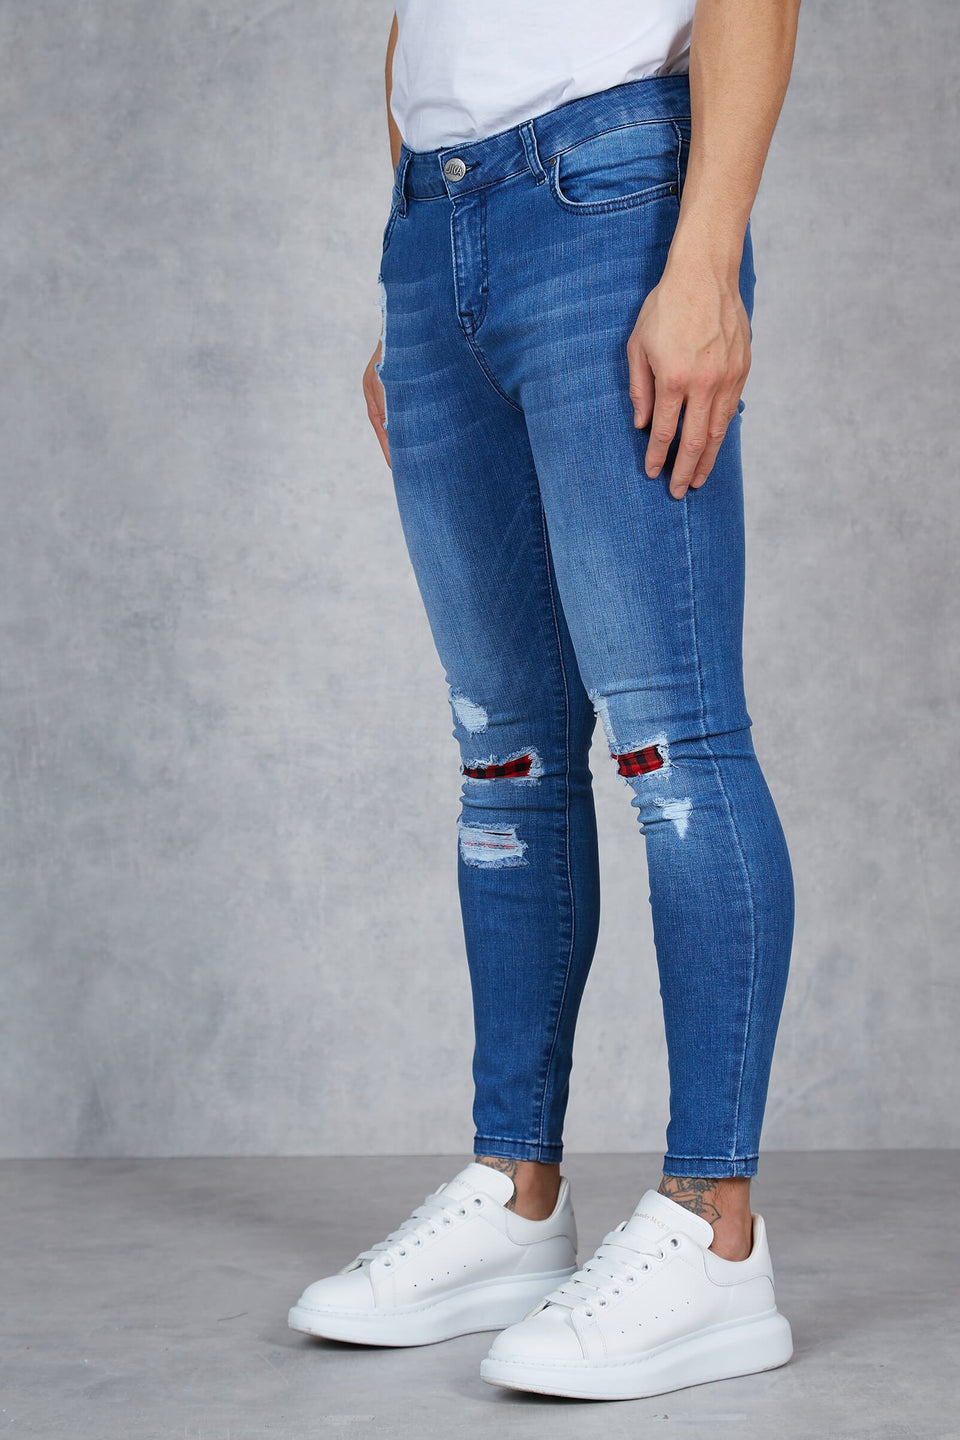 F1 - Grove Patchwork Distressed Super Spray On Skinny Jeans - Blue